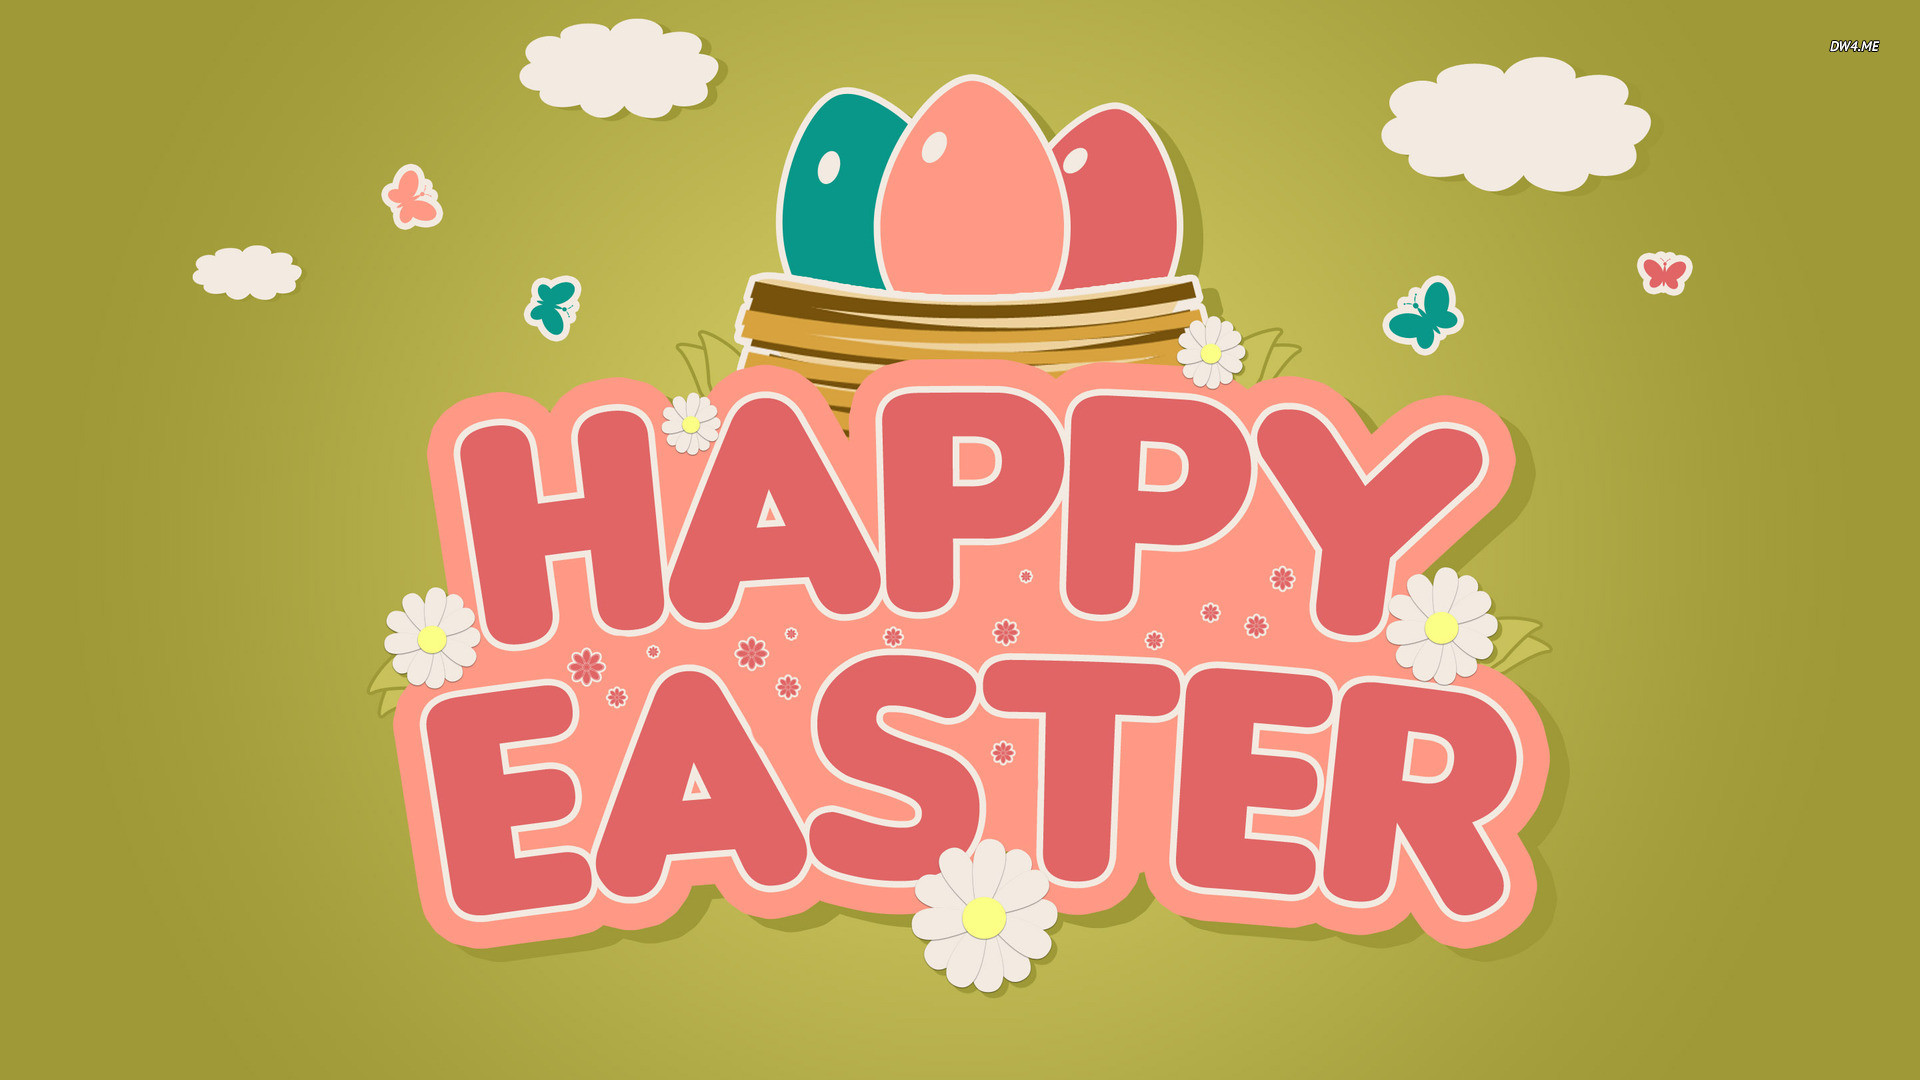 1920x1080 Happy Easter images HD Happy Easter Images Free Download